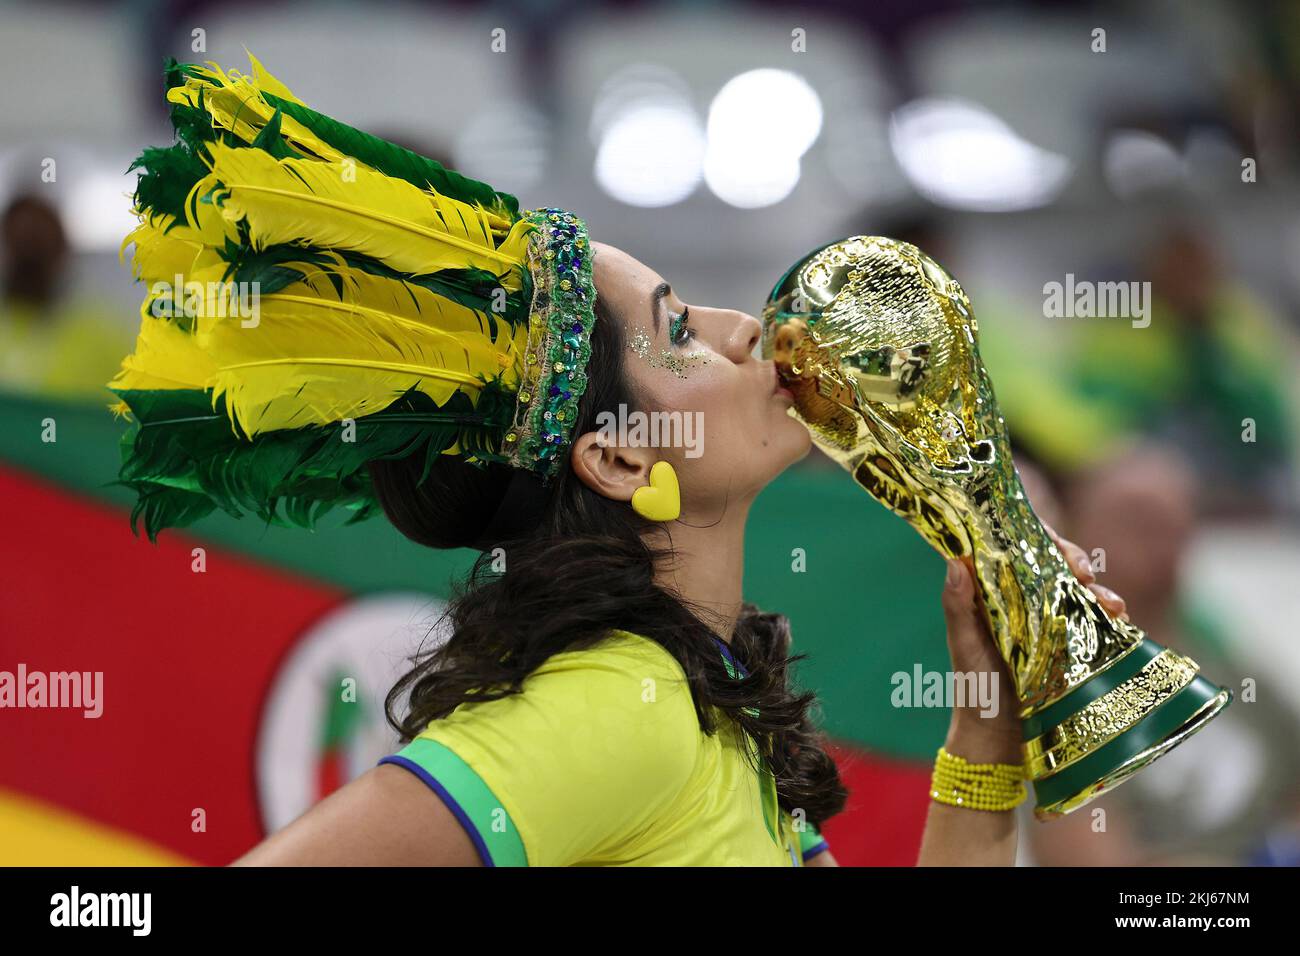 Lusail, Qatar. 24th Nov, 2022. A fan kisses a replica of the World Cup trophy before the Group G match between Brazil and Serbia at the 2022 FIFA World Cup at Lusail Stadium in Lusail, Qatar, Nov. 24, 2022. Credit: Xu Zijian/Xinhua/Alamy Live News Stock Photo